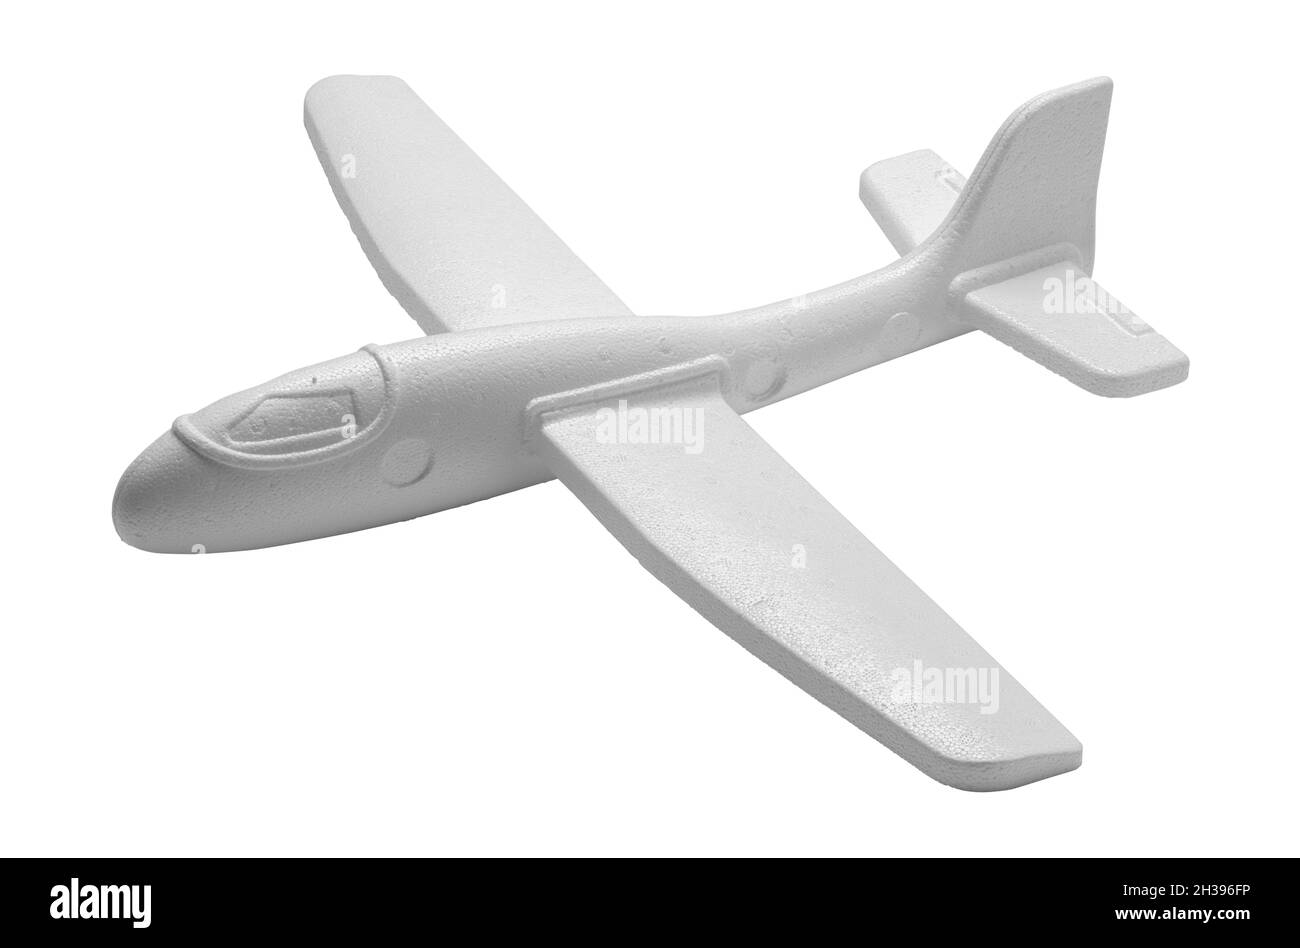 Large Foam Toy Plane Cut Out on White. Stock Photo